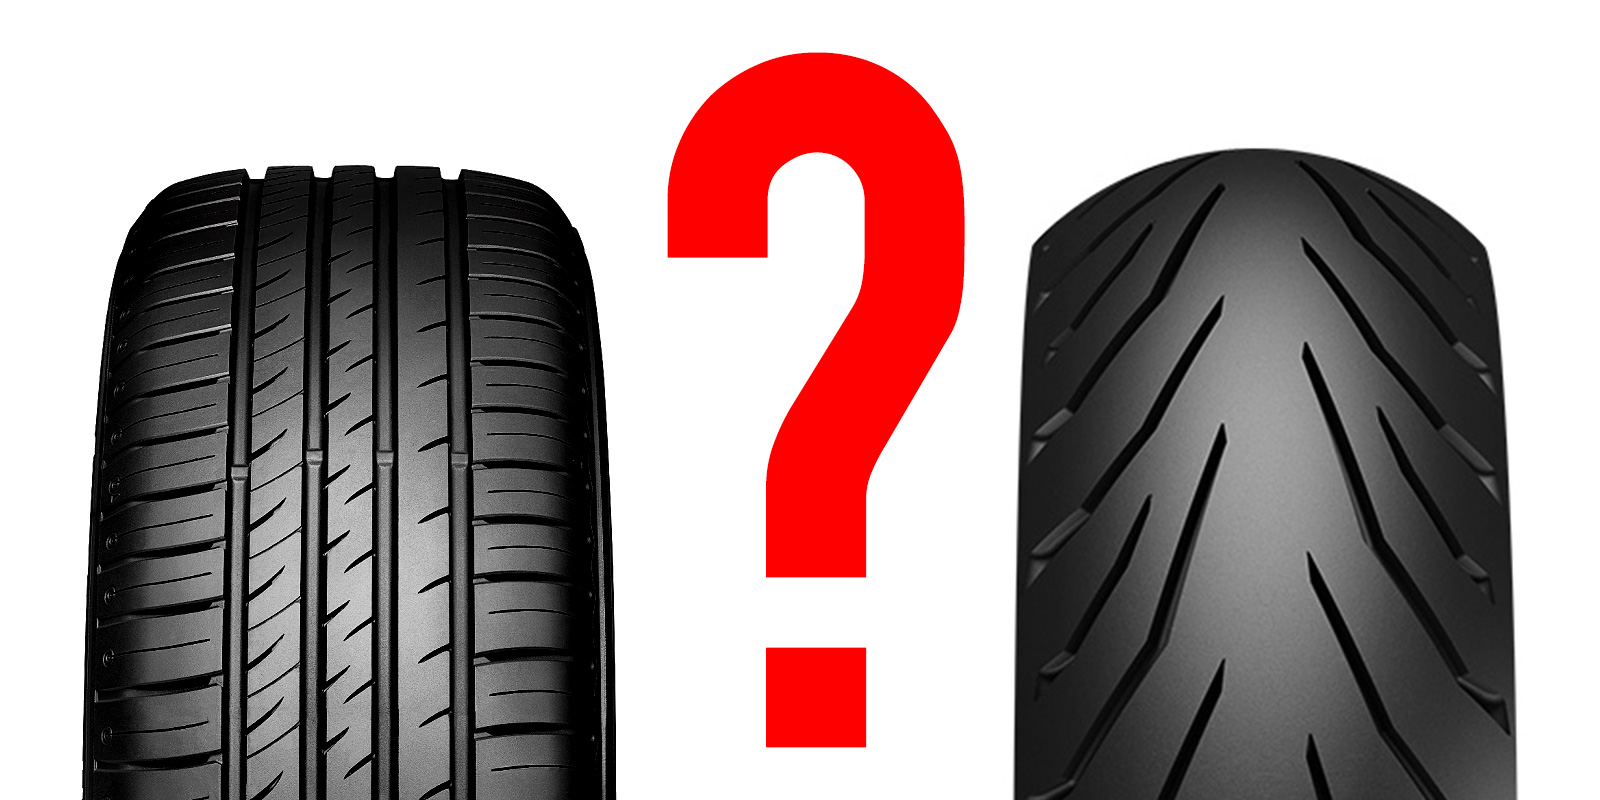 A car tyre and a motorcycle tyre separated by a question mark